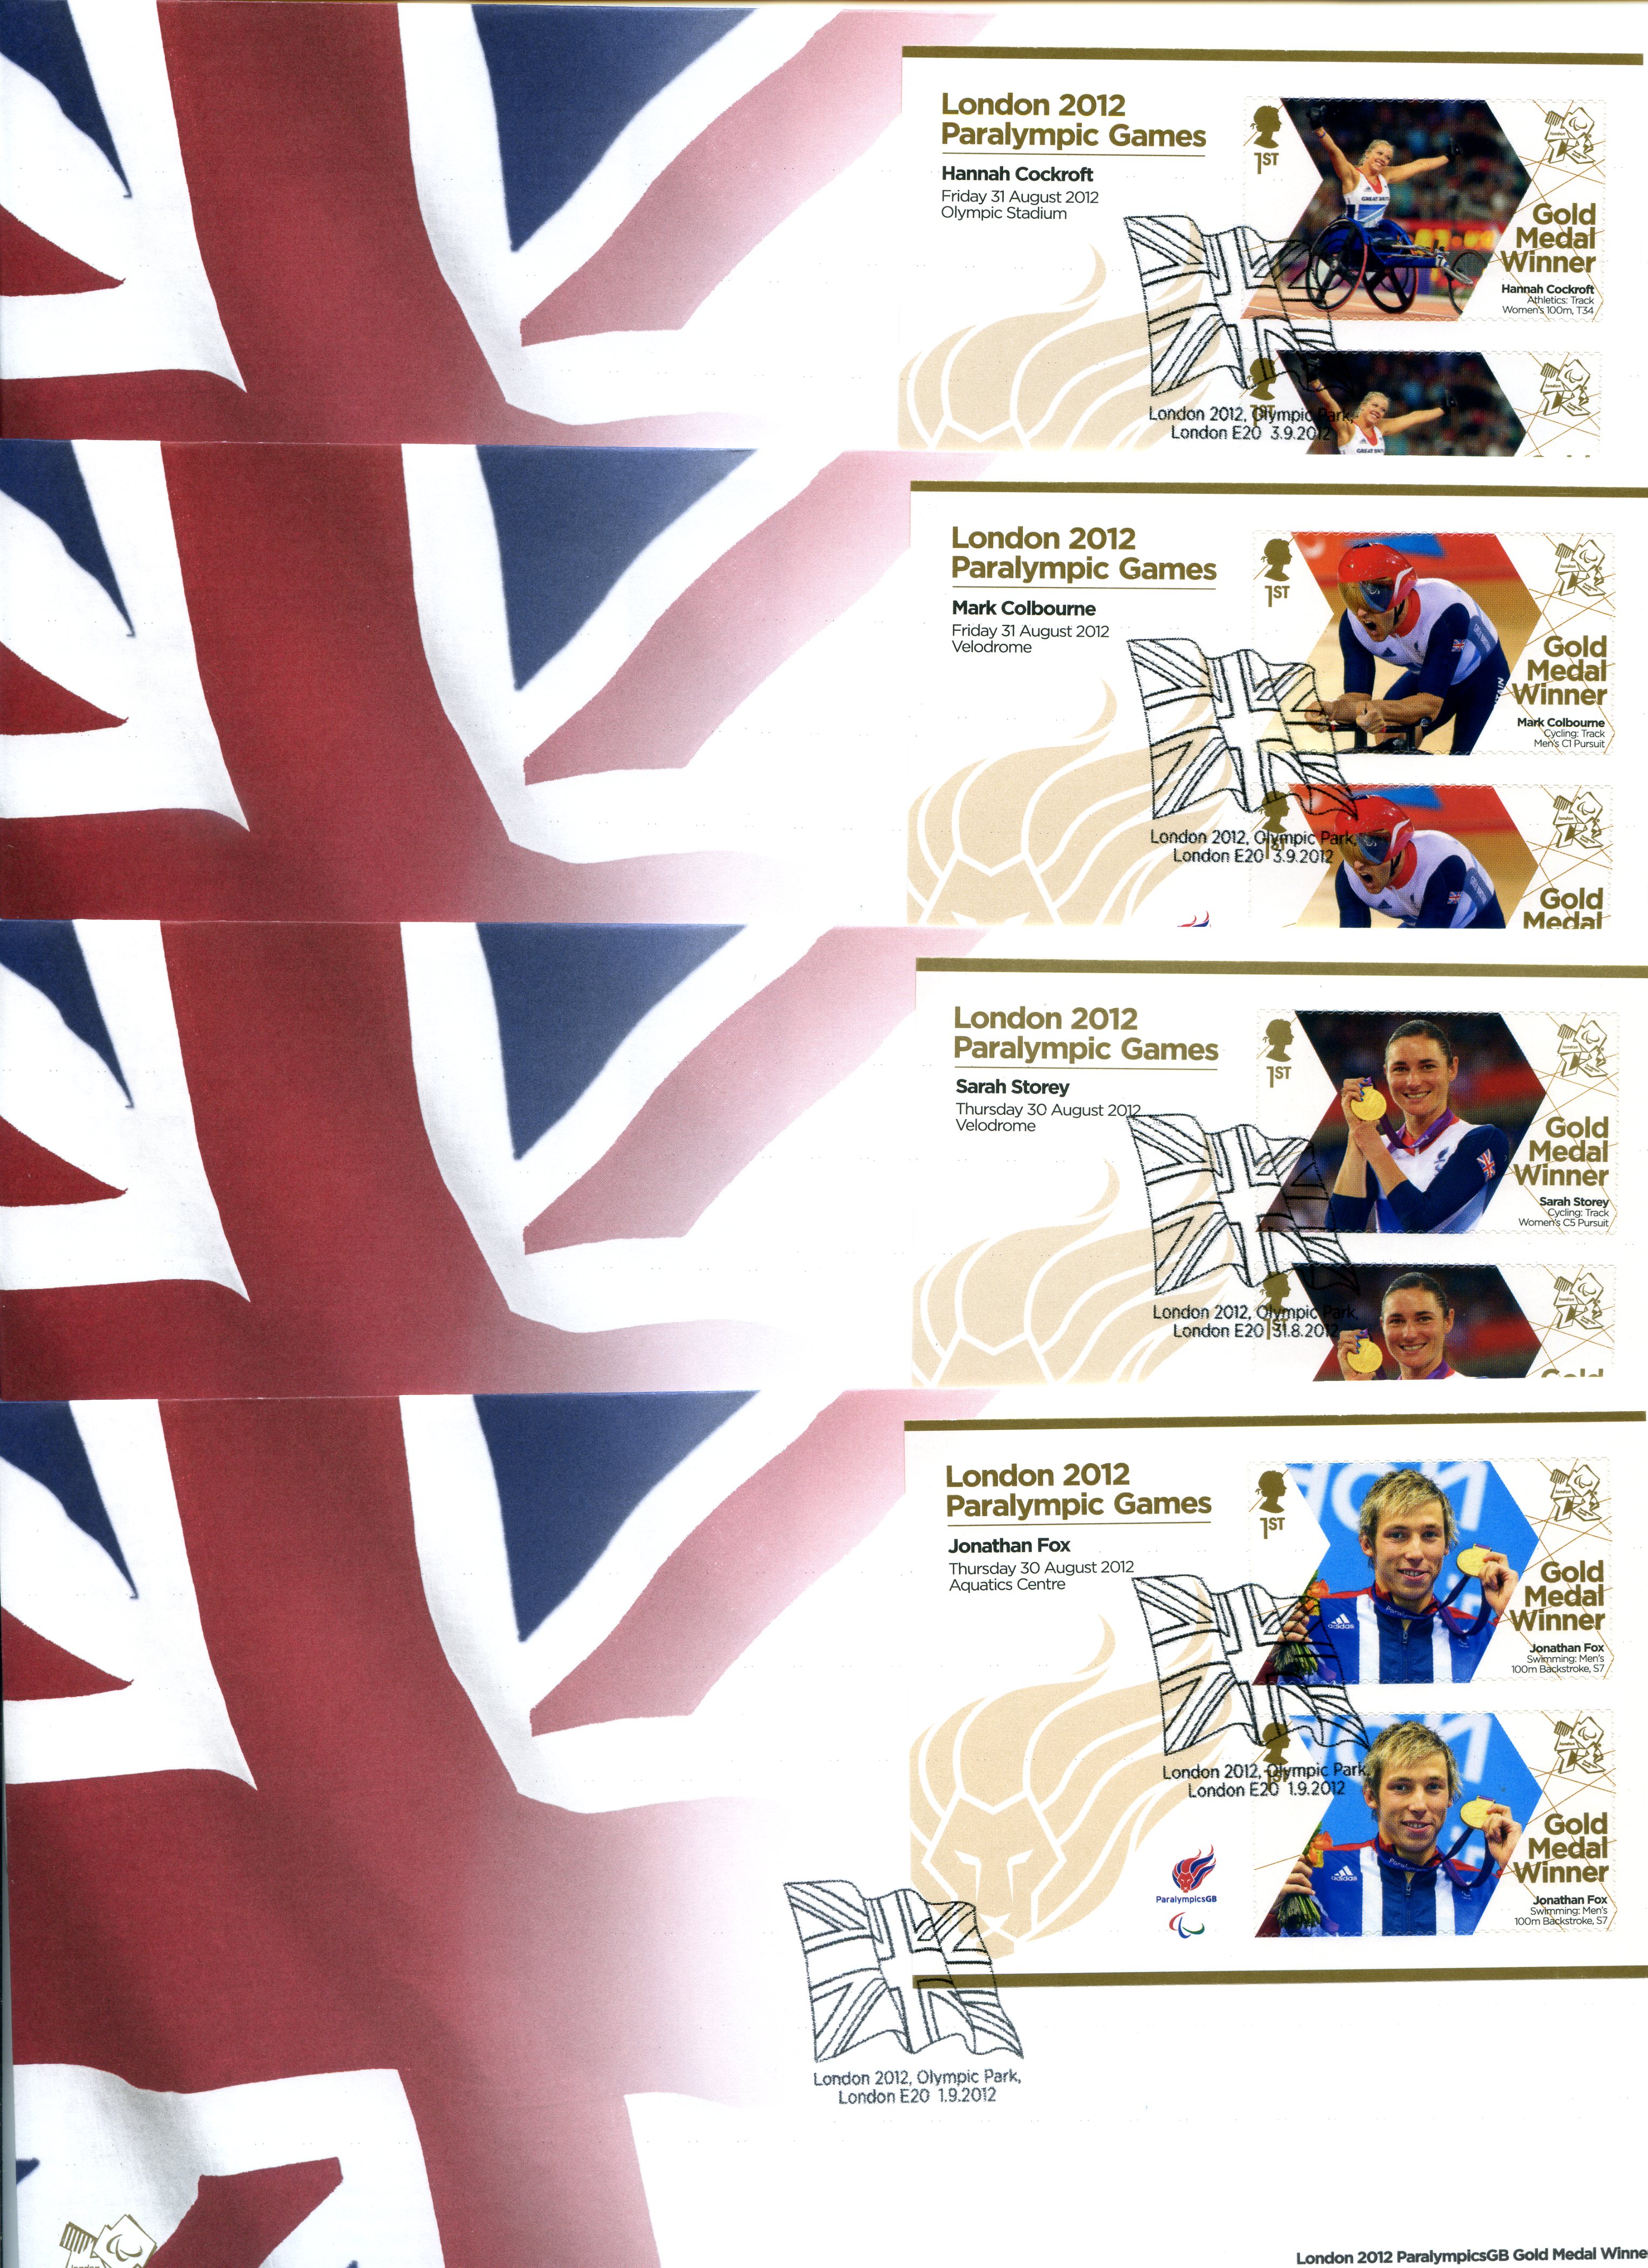 2012 LONDON PARALYMPIC GAMES - FULL SET OF 34 POSTAL COVERS - Image 9 of 9